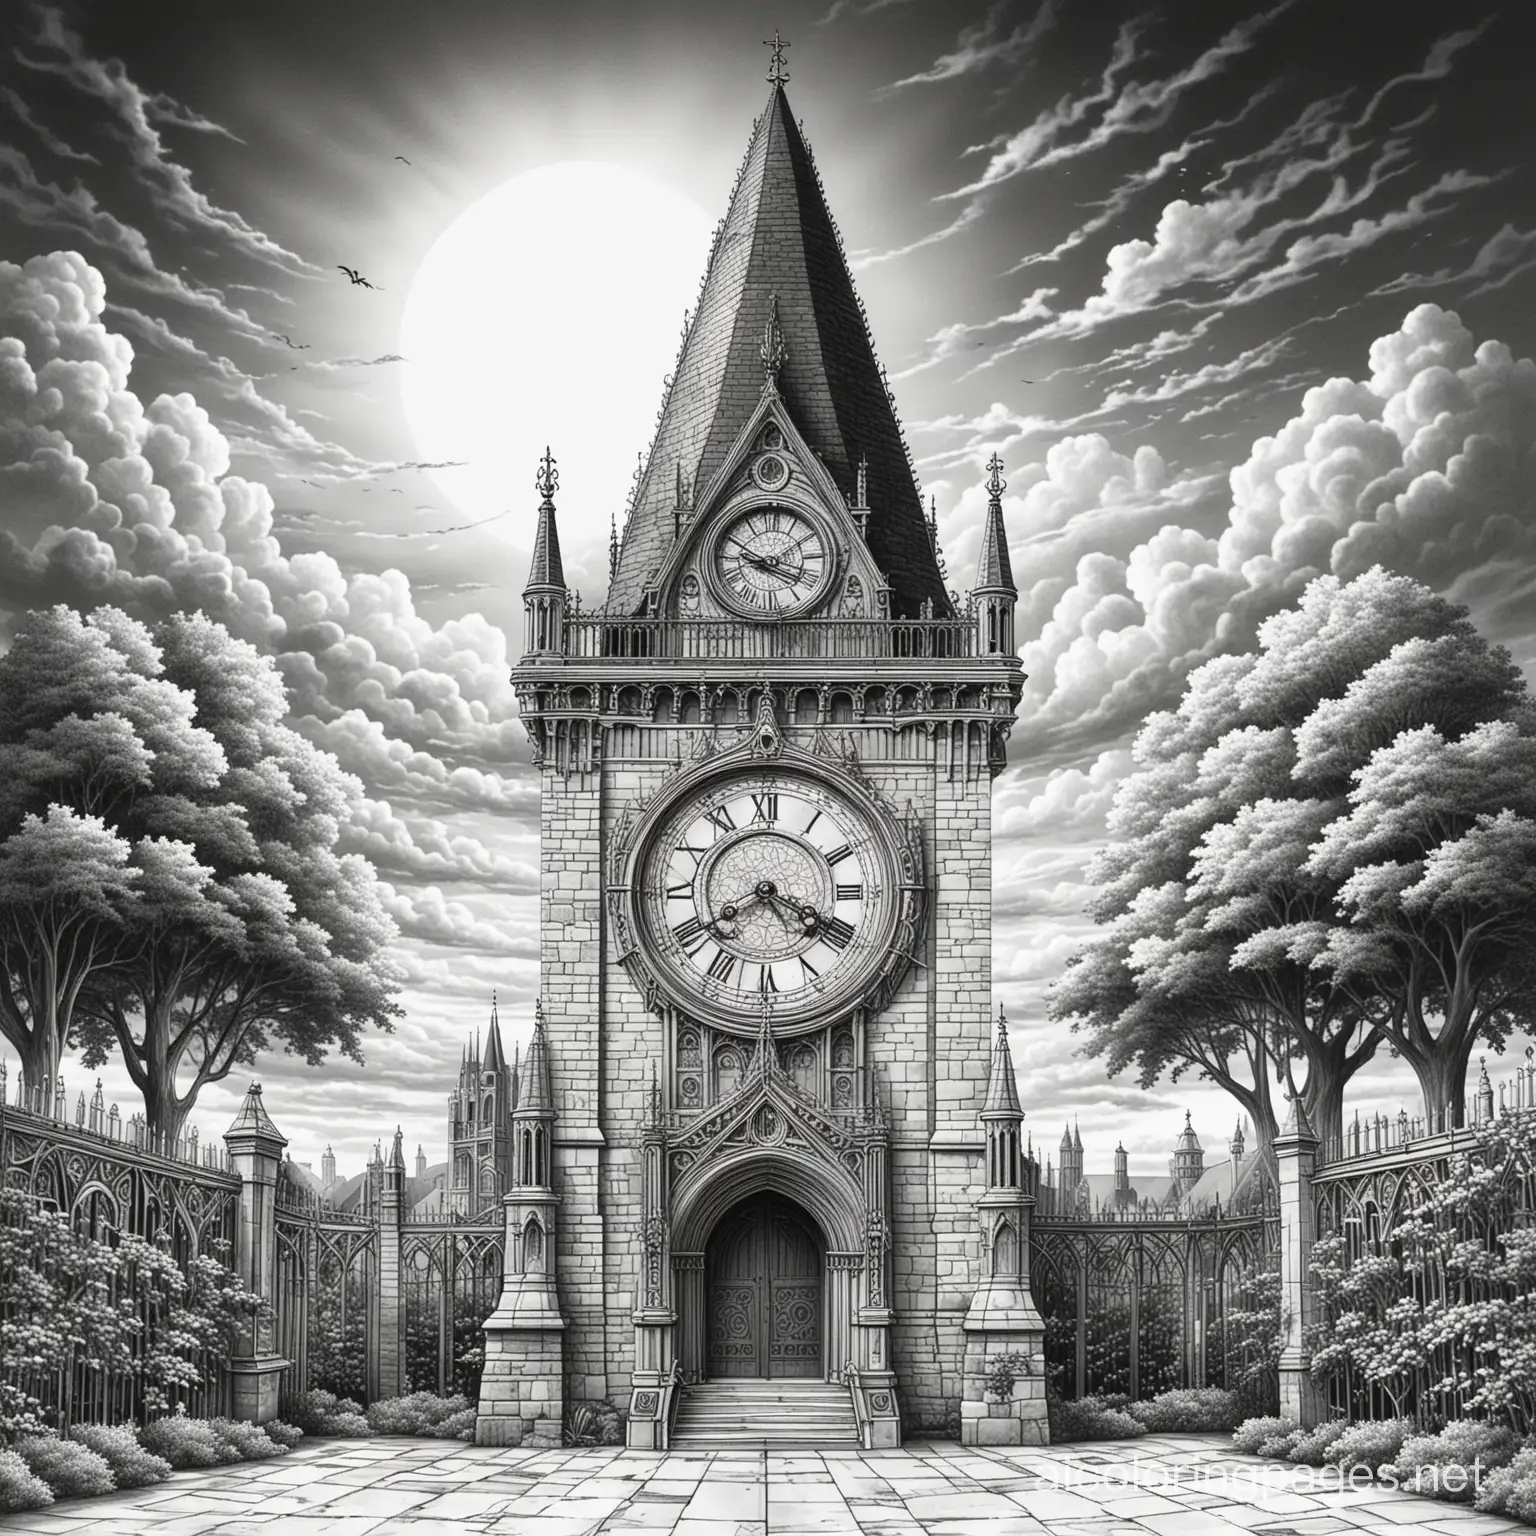 Intricate-Gothic-Clock-Tower-Coloring-Page-for-Kids-Detailed-Line-Art-Design